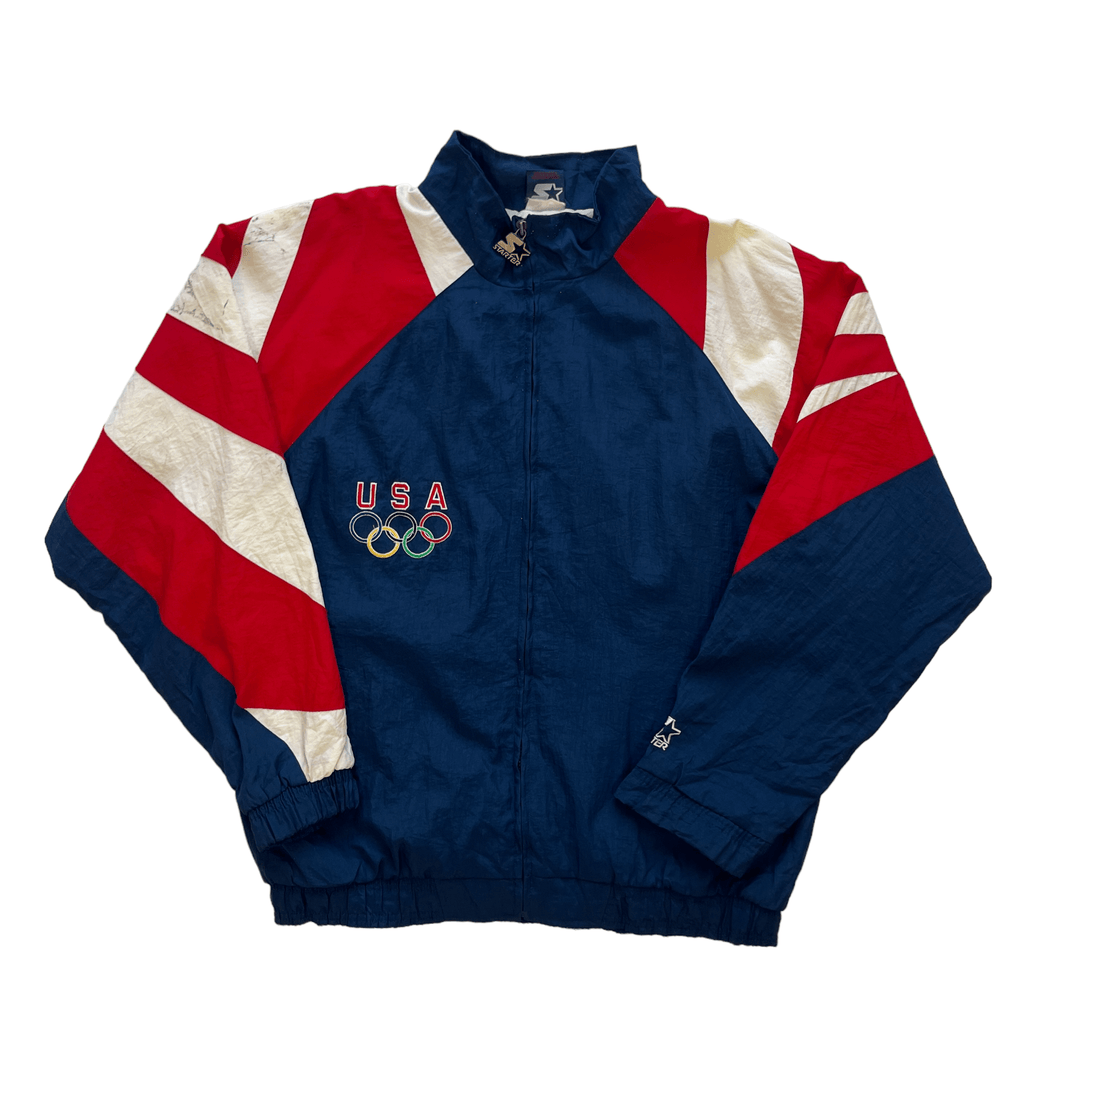 Vintage 90s Red, Navy Blue + White Starter x Looney Tunes USA Jacket - Extra Large - The Streetwear Studio